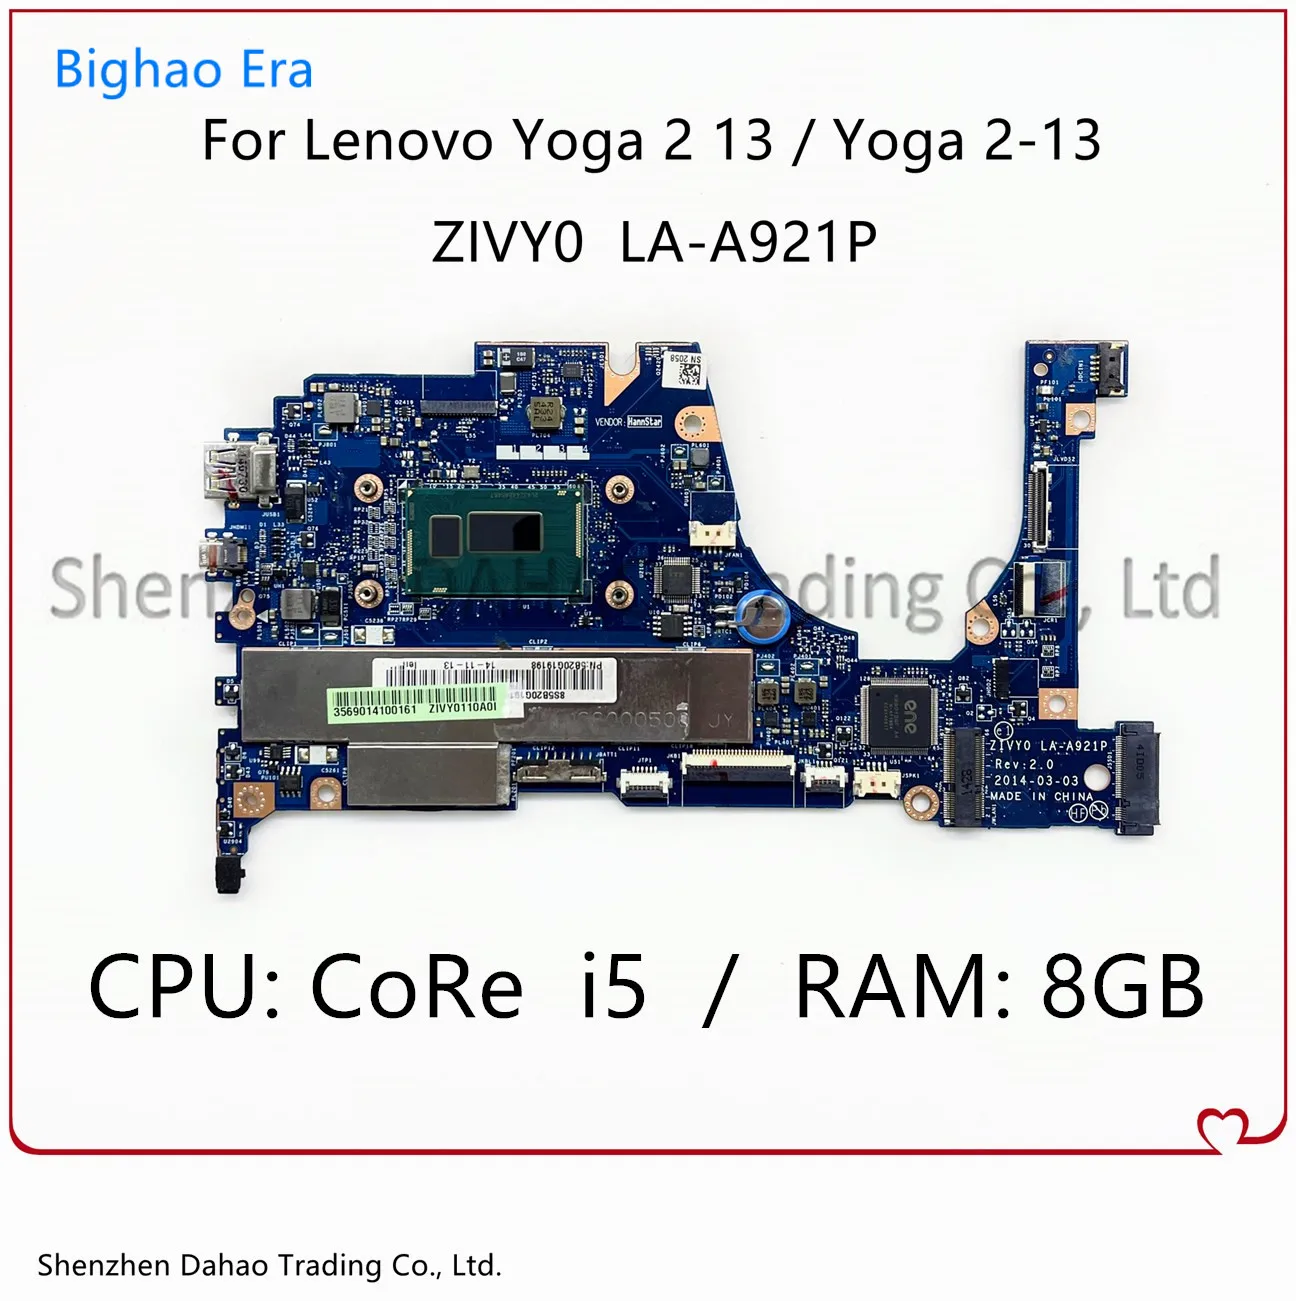 

For Lenovo Yoga 2 13 Laptop Motherboard ZIVY0 LA-A921P Mainboard With CoRe i5 CPU 8GB-RAM FRU:5B20G57340 5B20G19198 100% OK